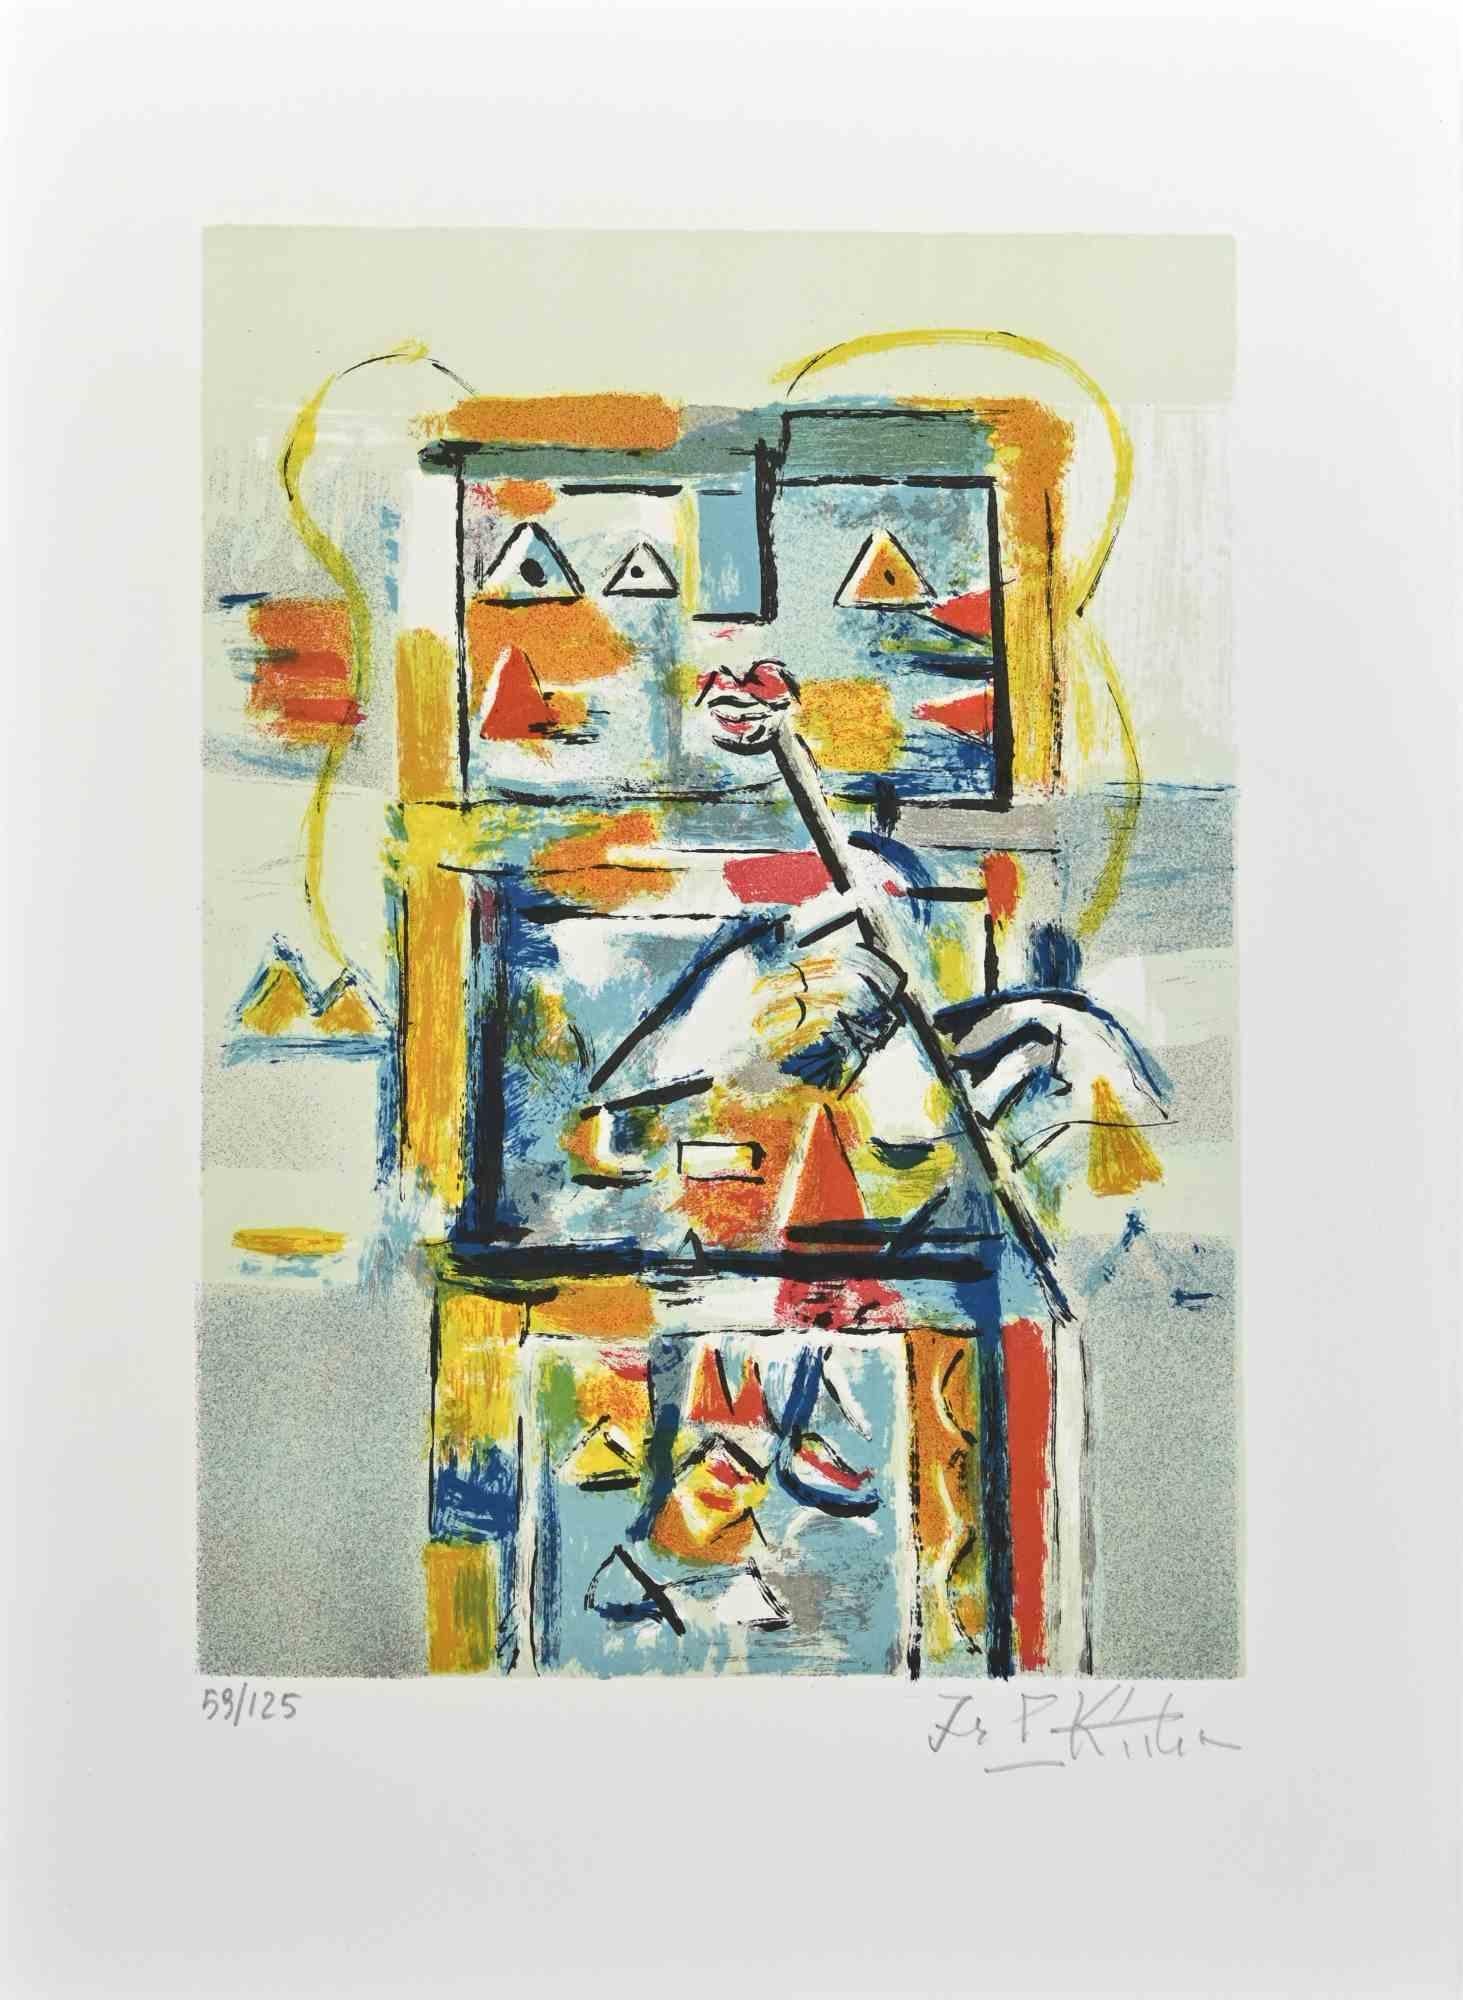 Robot is an Original Lithograph realized in the 1980s by Ibrahim Kodra.

Good conditions. Hand-signed.

Numbered. Edition, 59/125.

The artwork is depicted through soft strokes in a well-balanced composition.